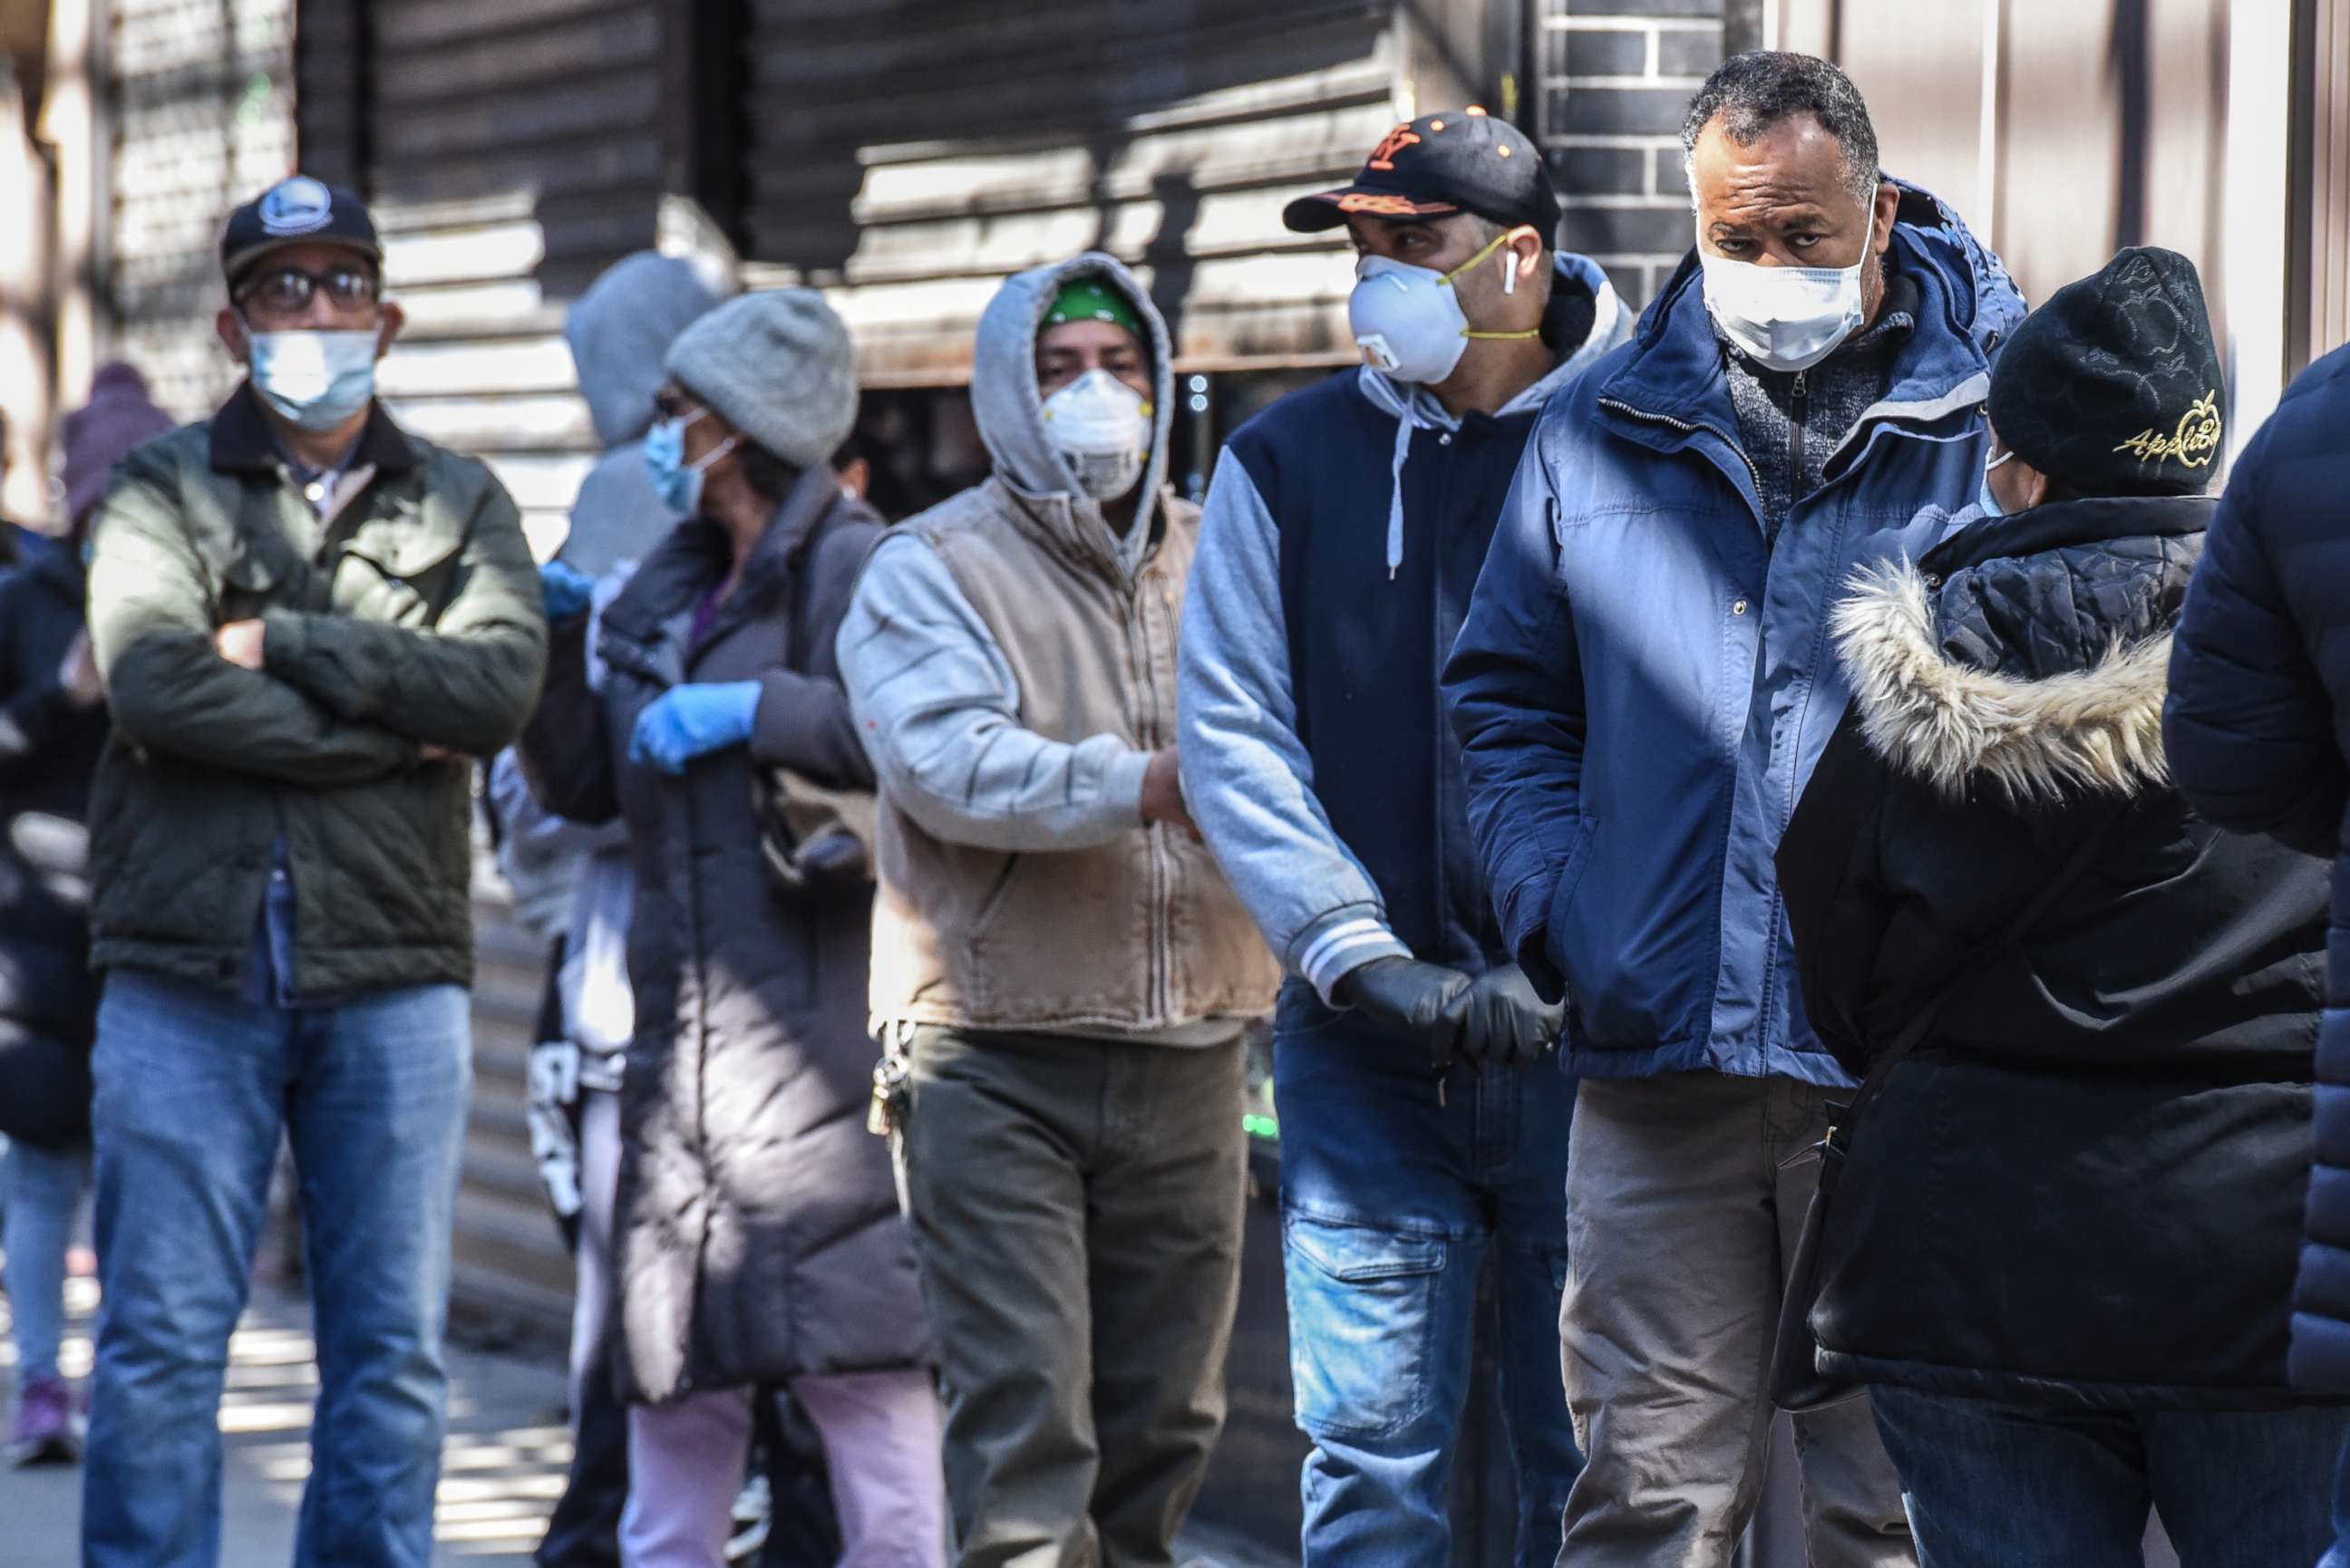 PHOTO: People stand in line while wearing face masks in the Elmhurst neighborhood on April 1, 2020, in New York.